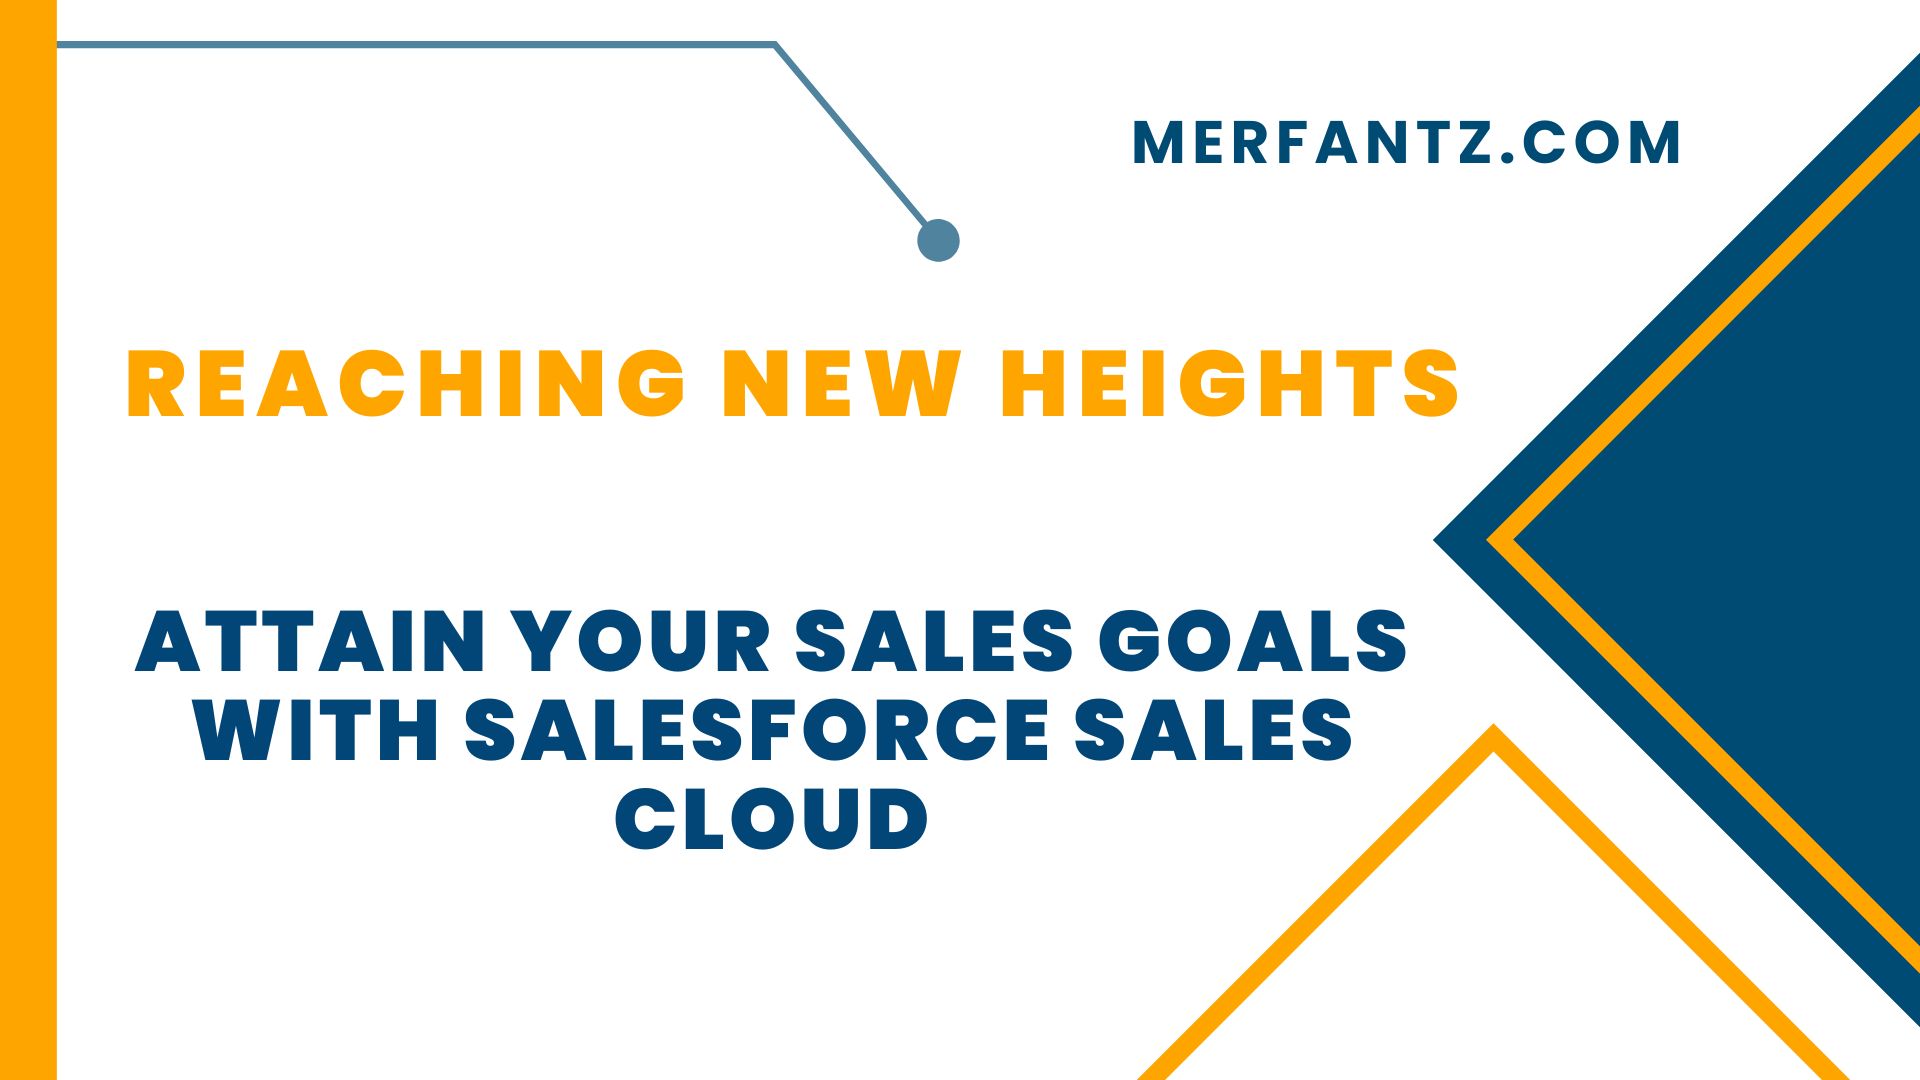 Attain Your Sales Goals with Salesforce Sales Cloud